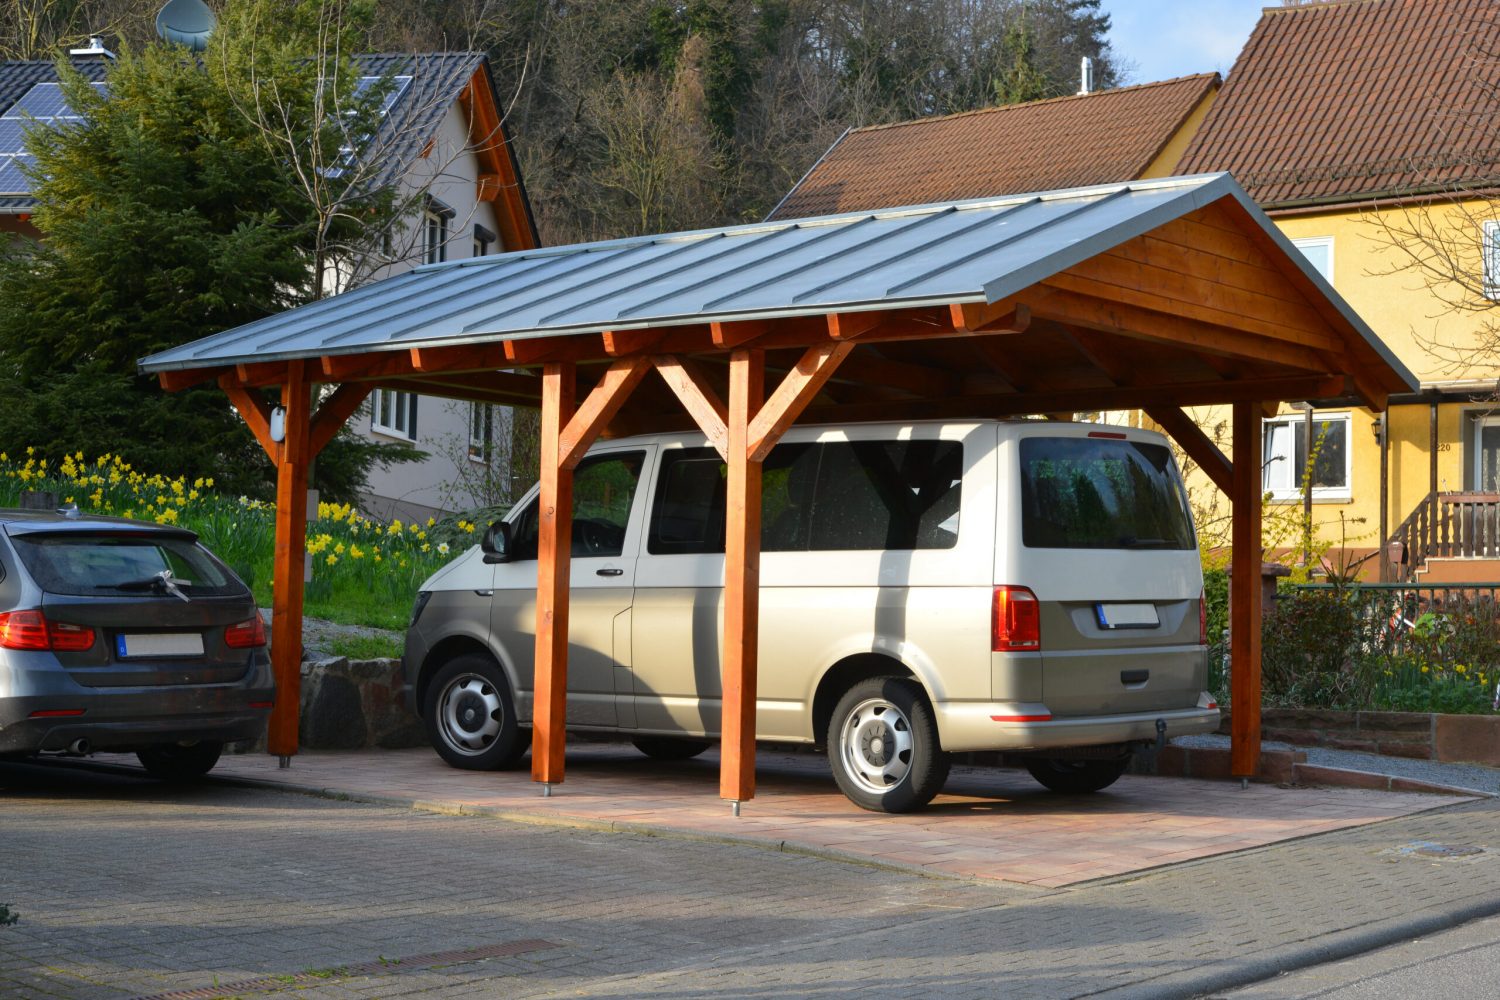 New,Wooden,Carport,With,Standing,Seam,Metal,Roof,In,Front